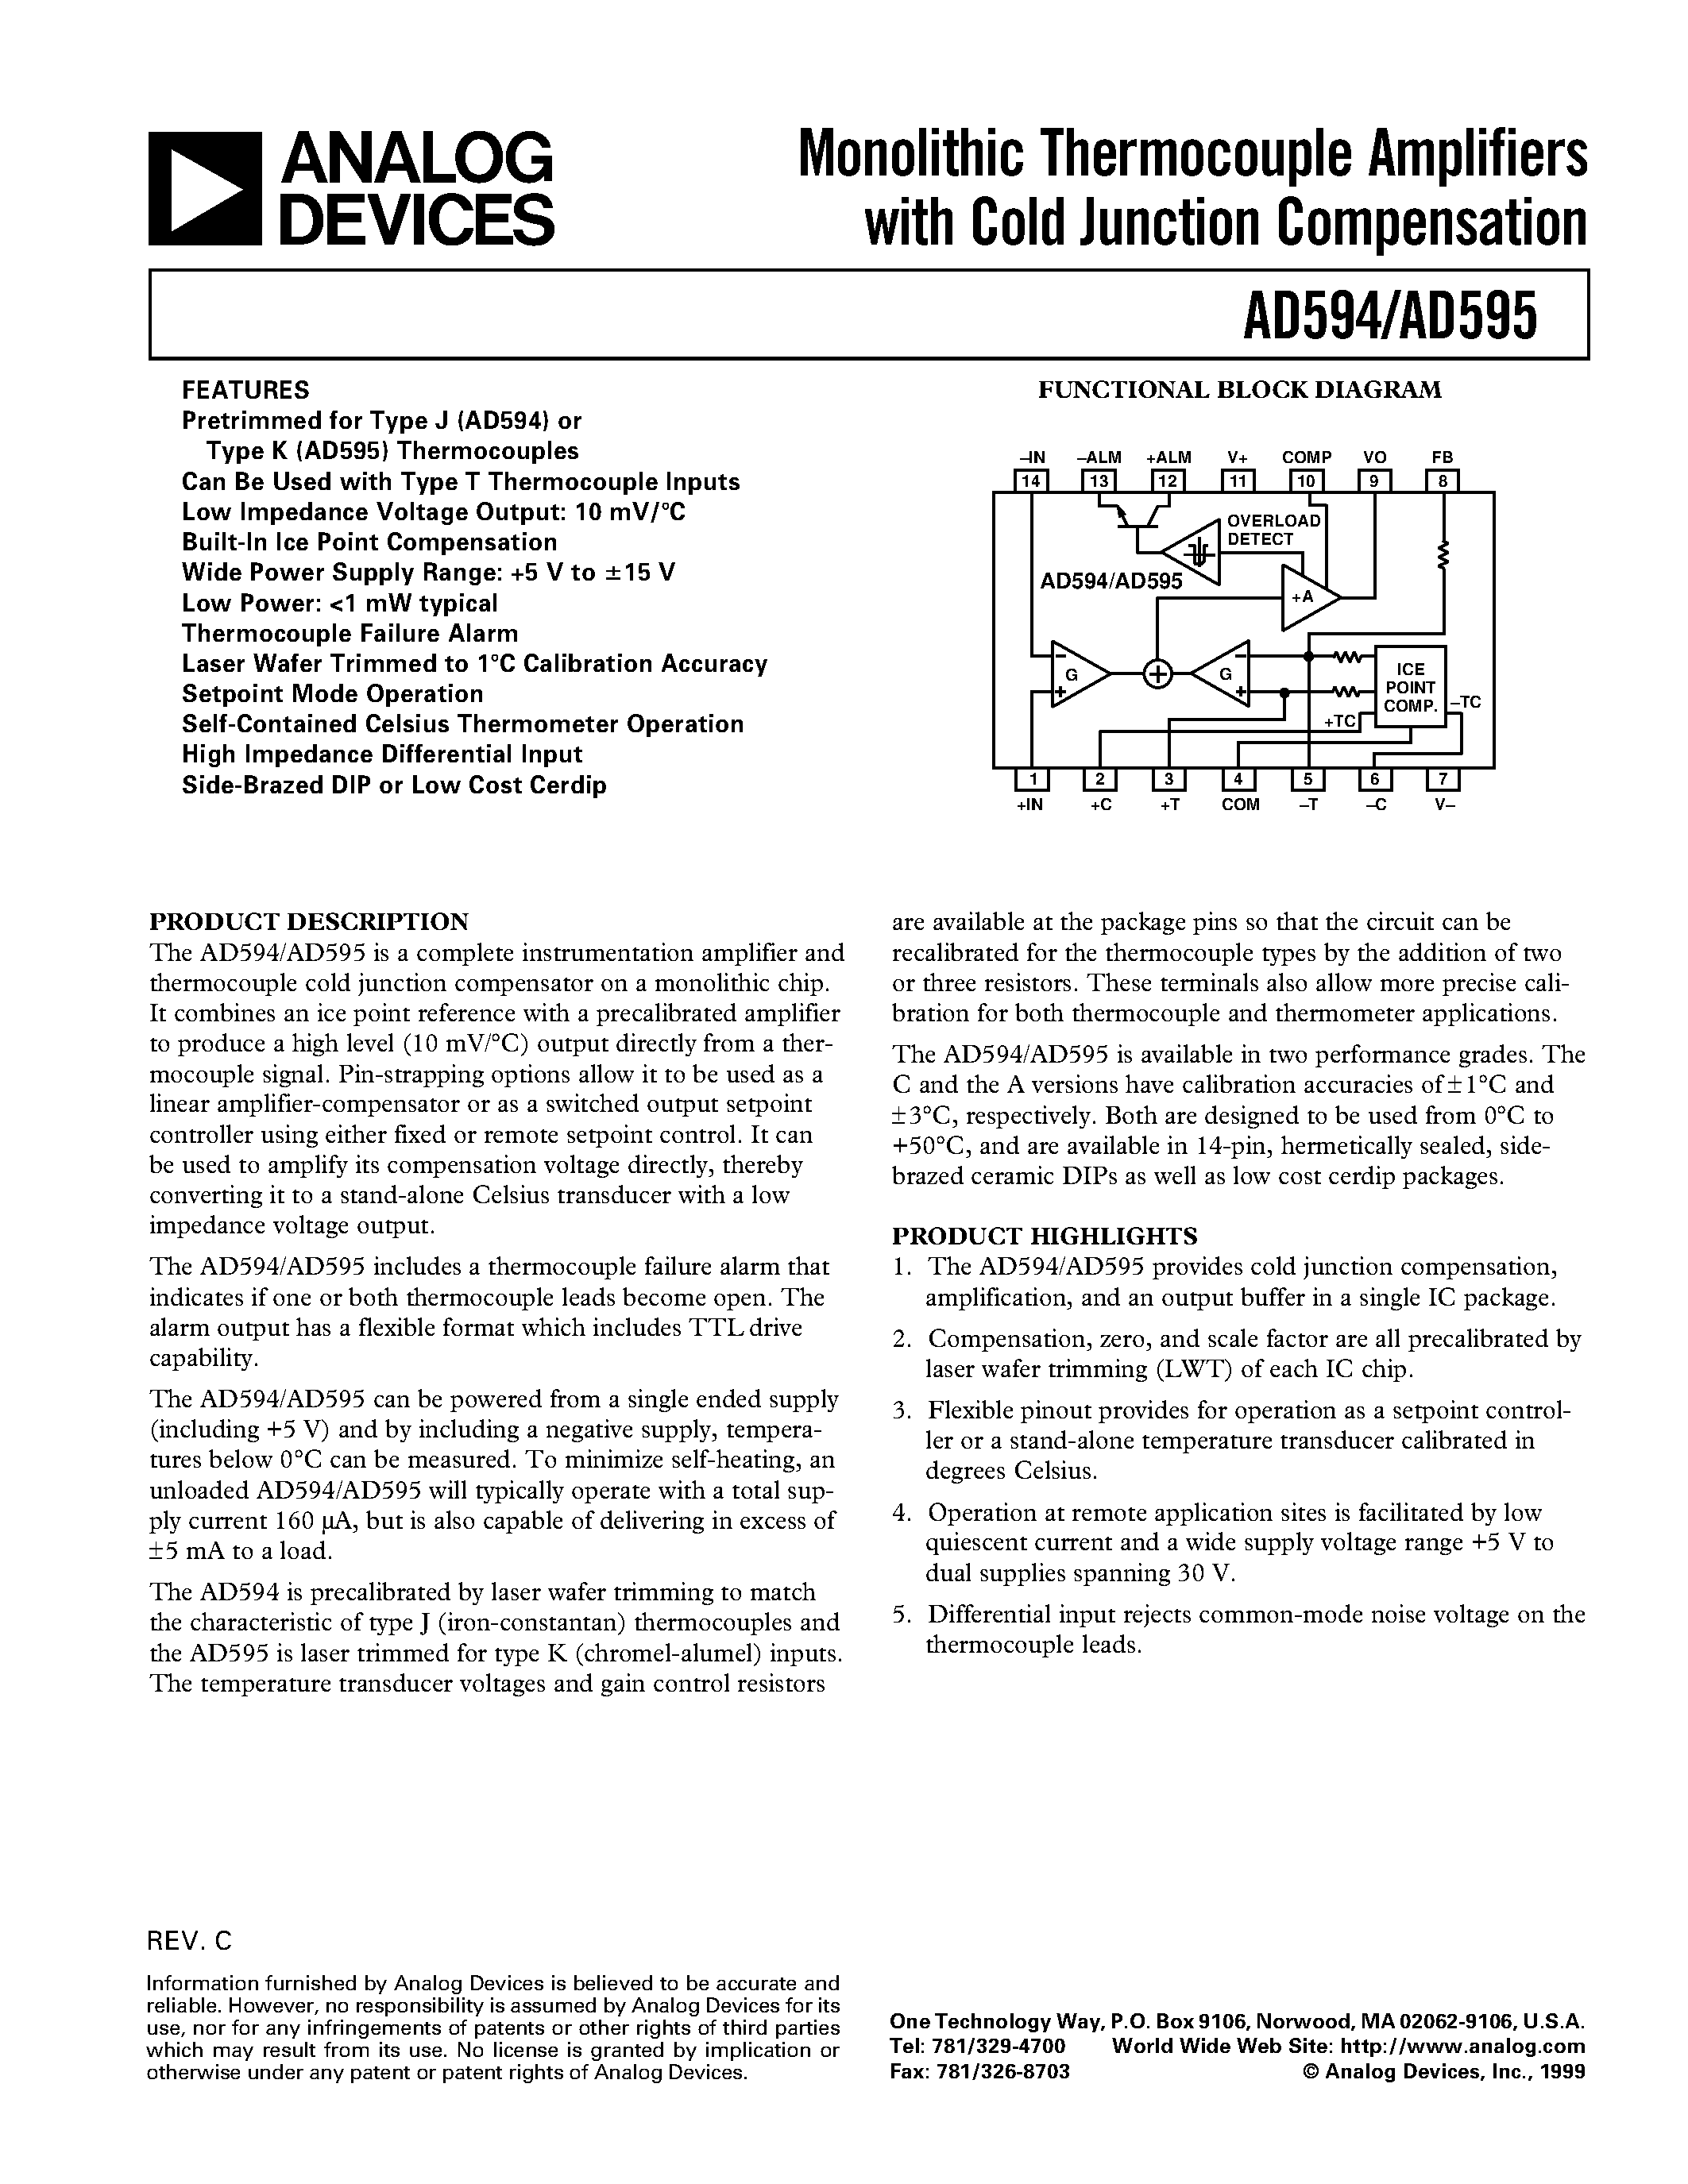 Datasheet AD595CQ - Monolithic Thermocouple Amplifiers with Cold Junction Compensation page 1